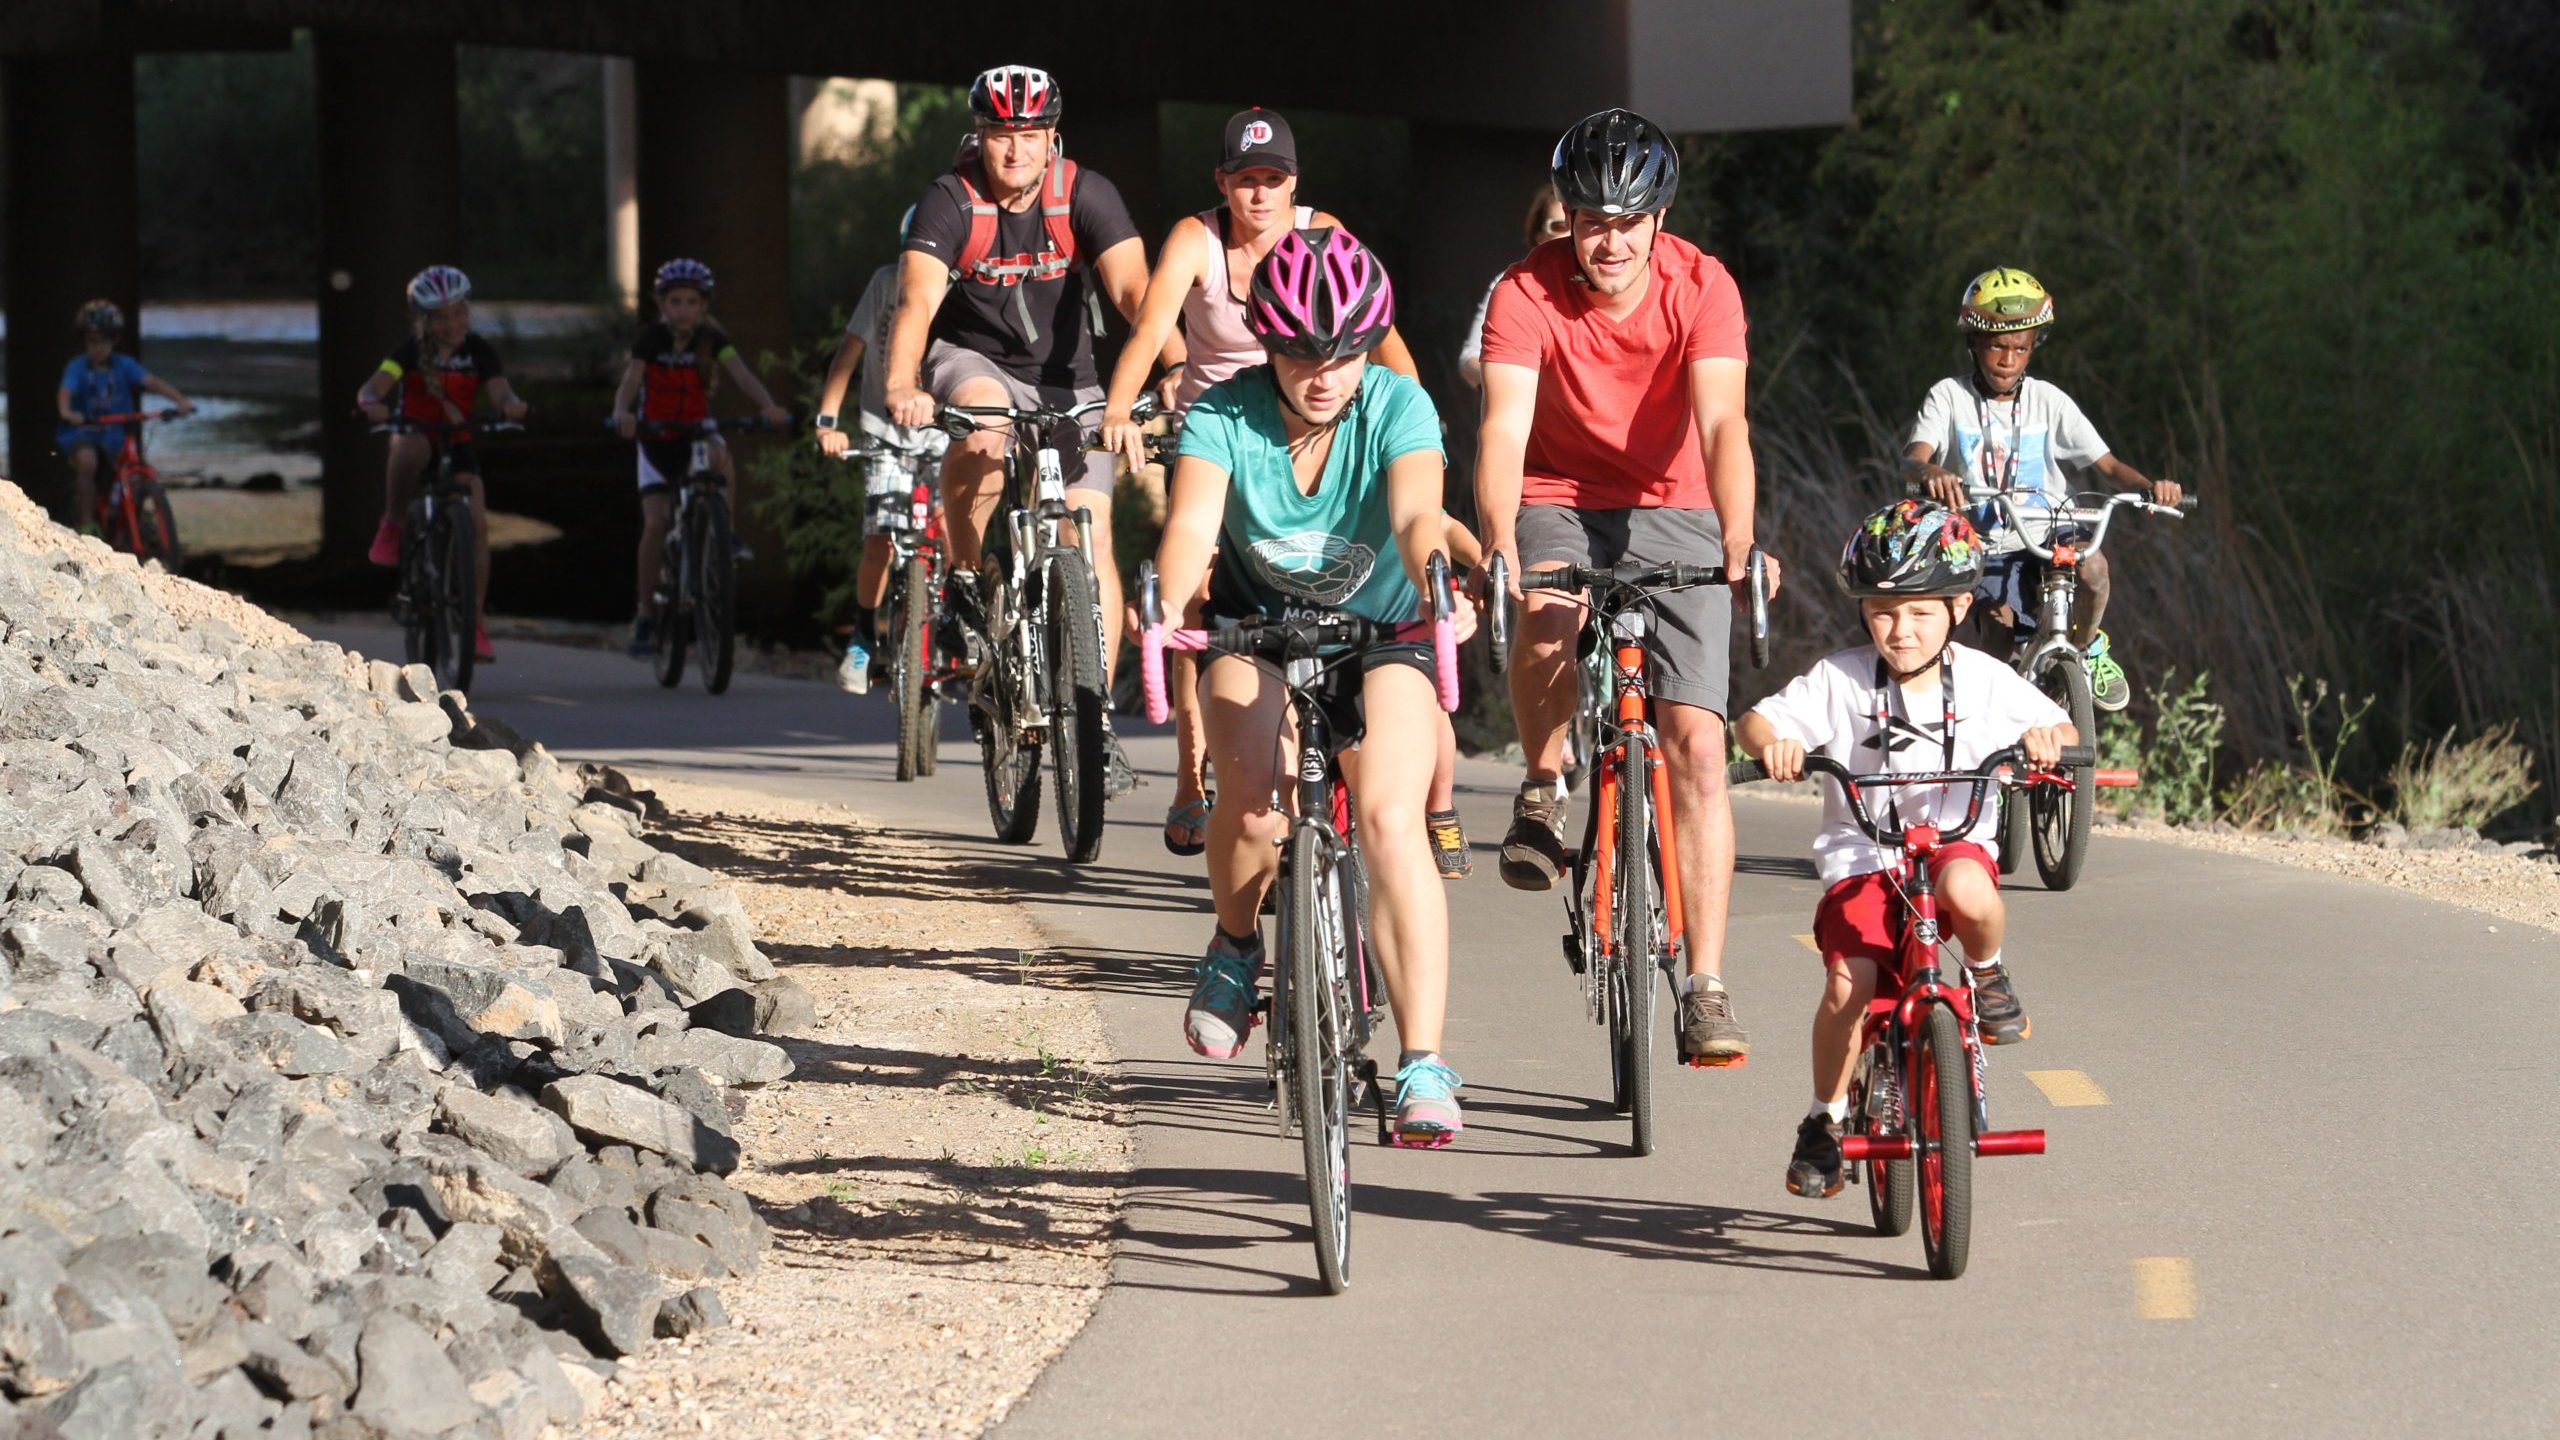 League of American Bicyclists has recognized St. George with a silver-level Bicycle Friendly Commun...